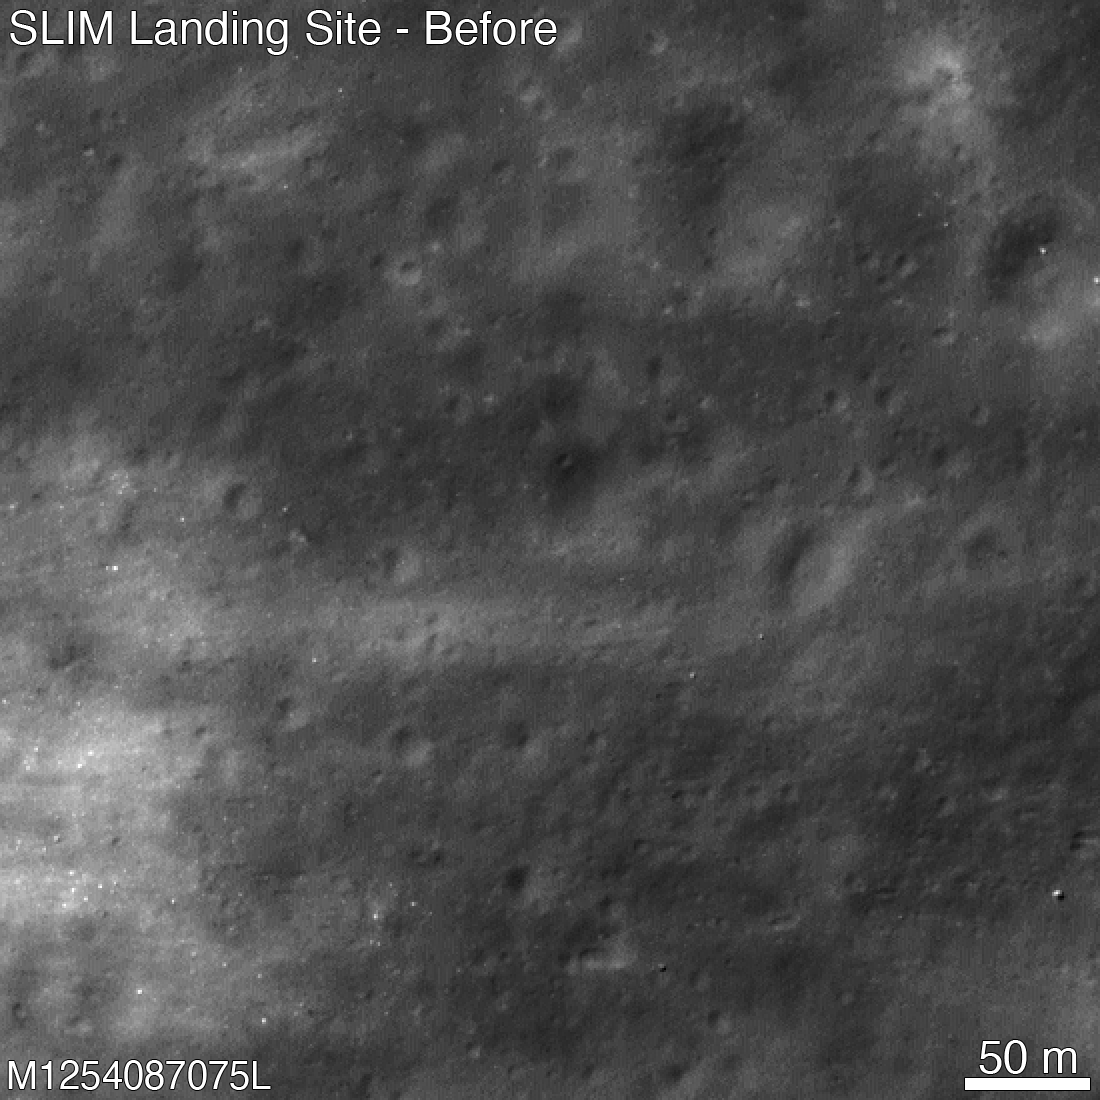 A black and white gif of two images of the Moon's surface before and after SLIM landed on the surface. A scale line for 50m is in the bottom right. The second image is slightly brighter around the landing site. 